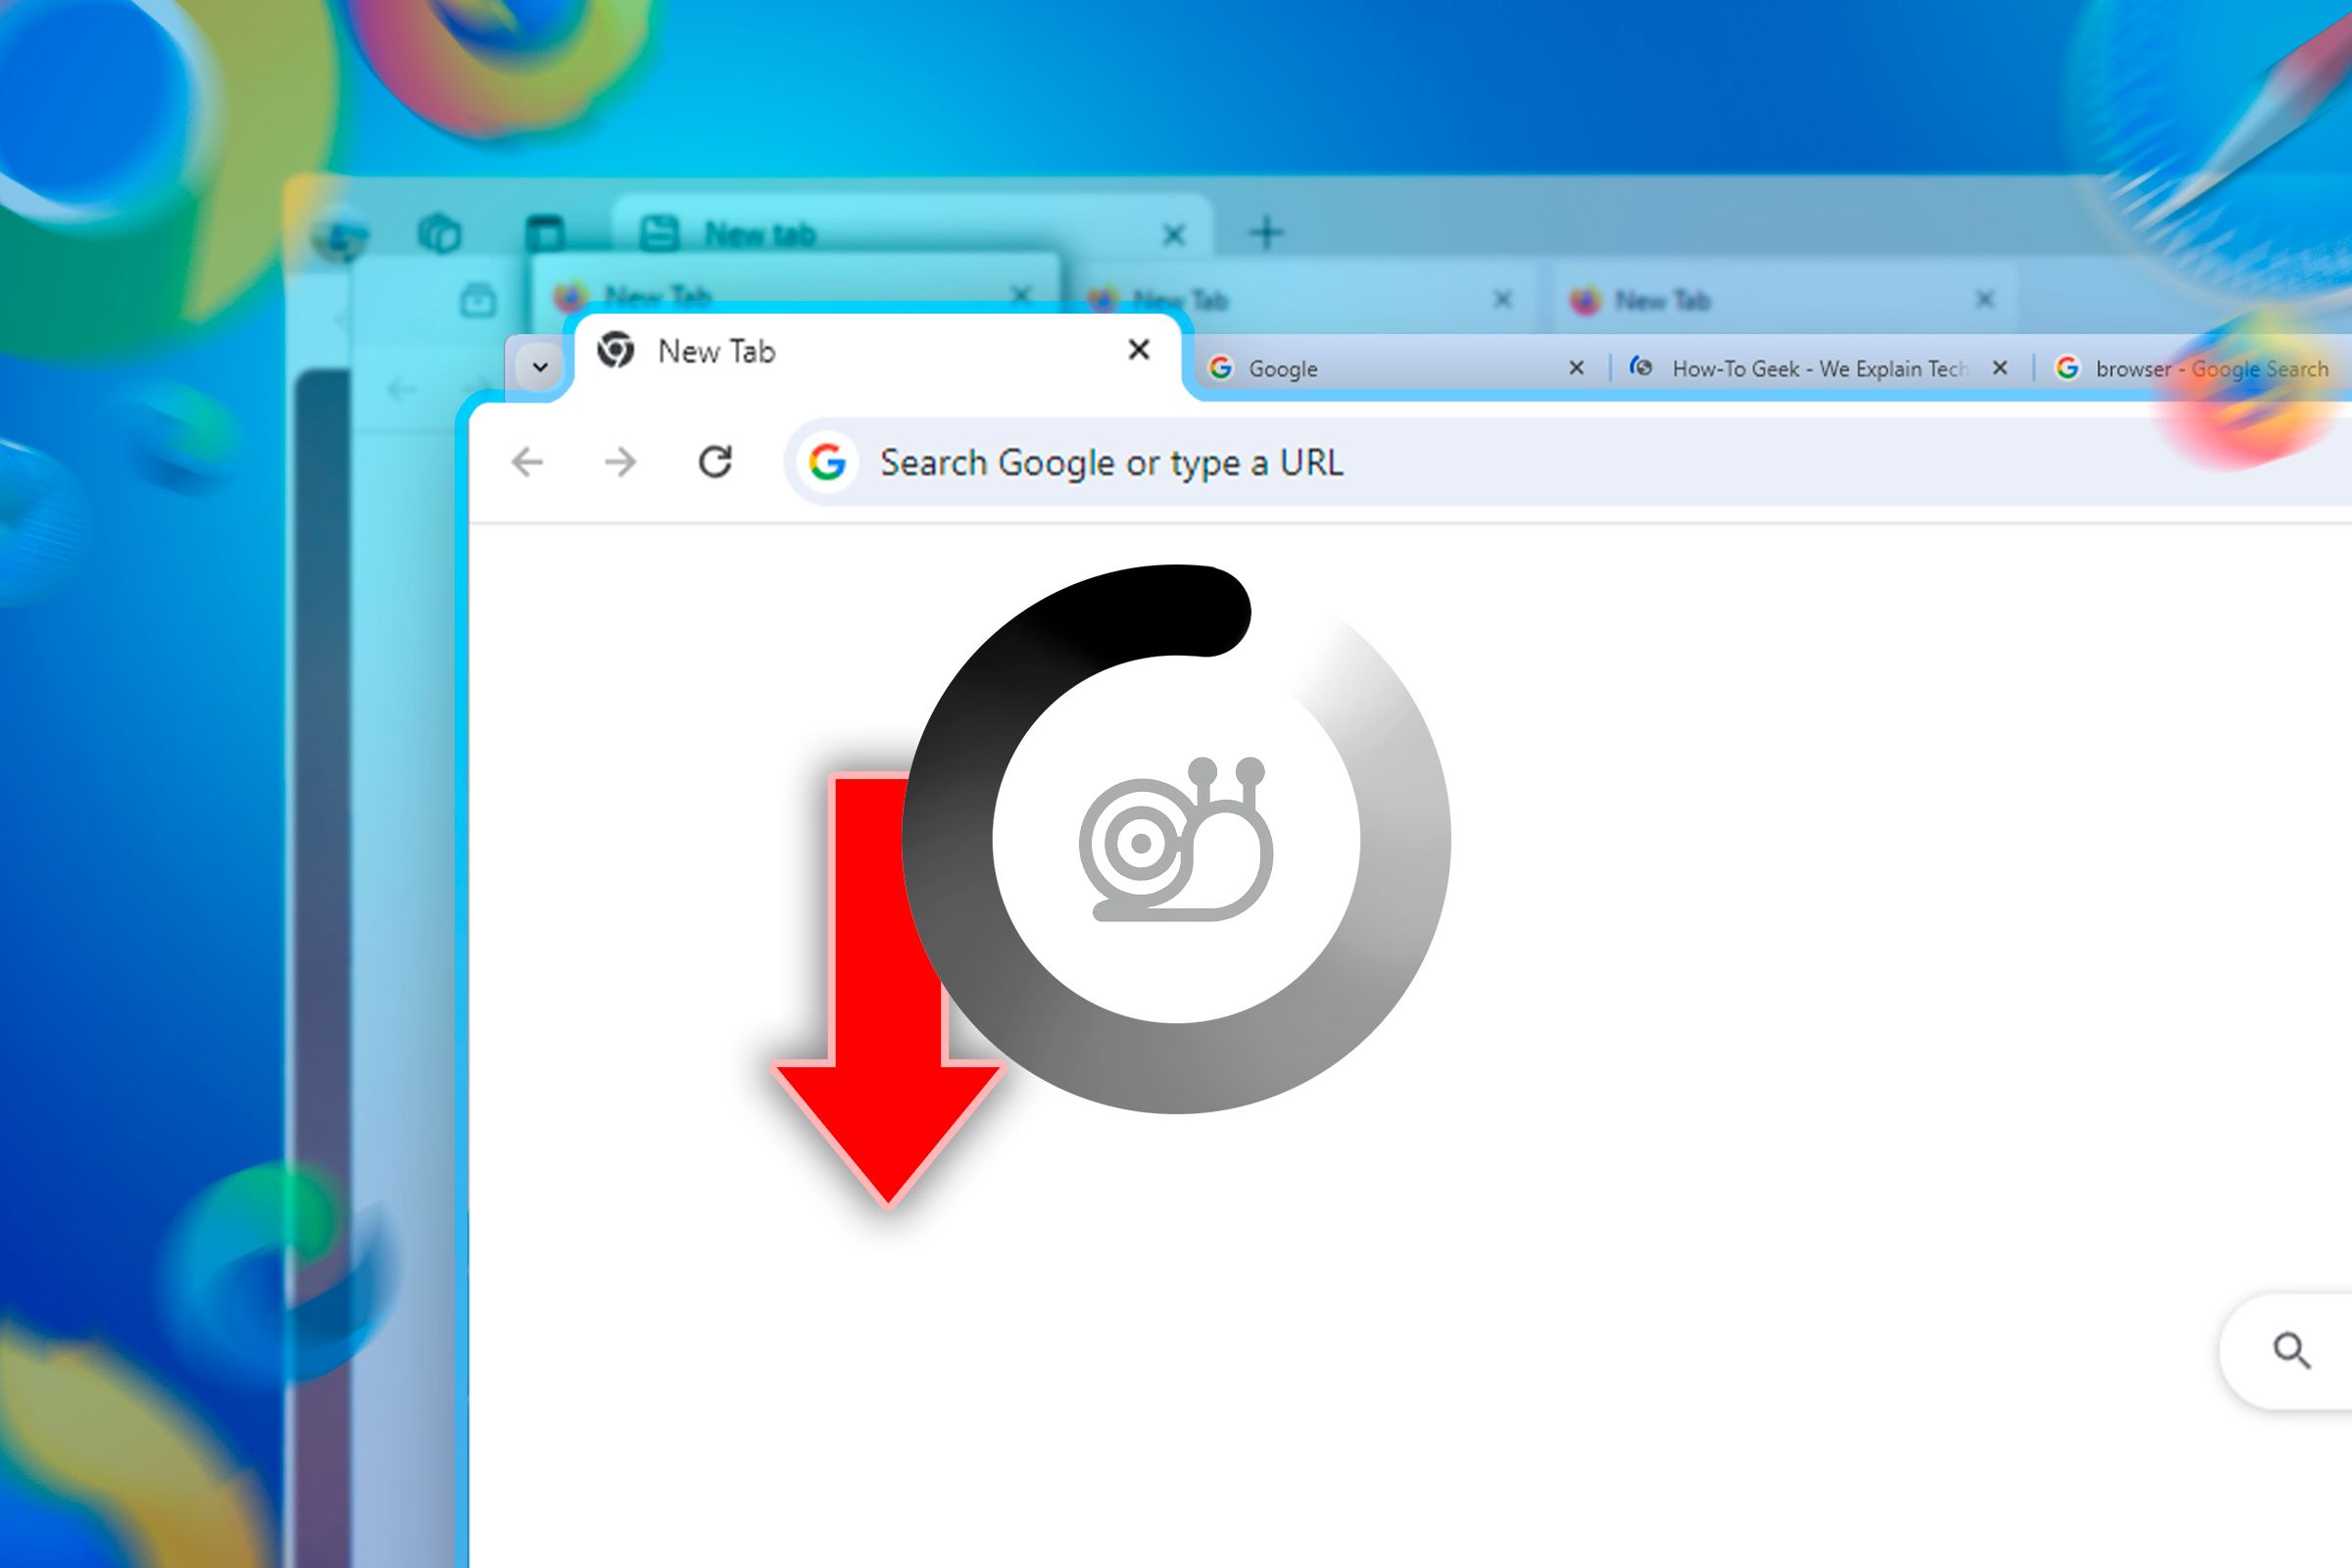 Some browser windows with an icon in the center, representing slowing down.